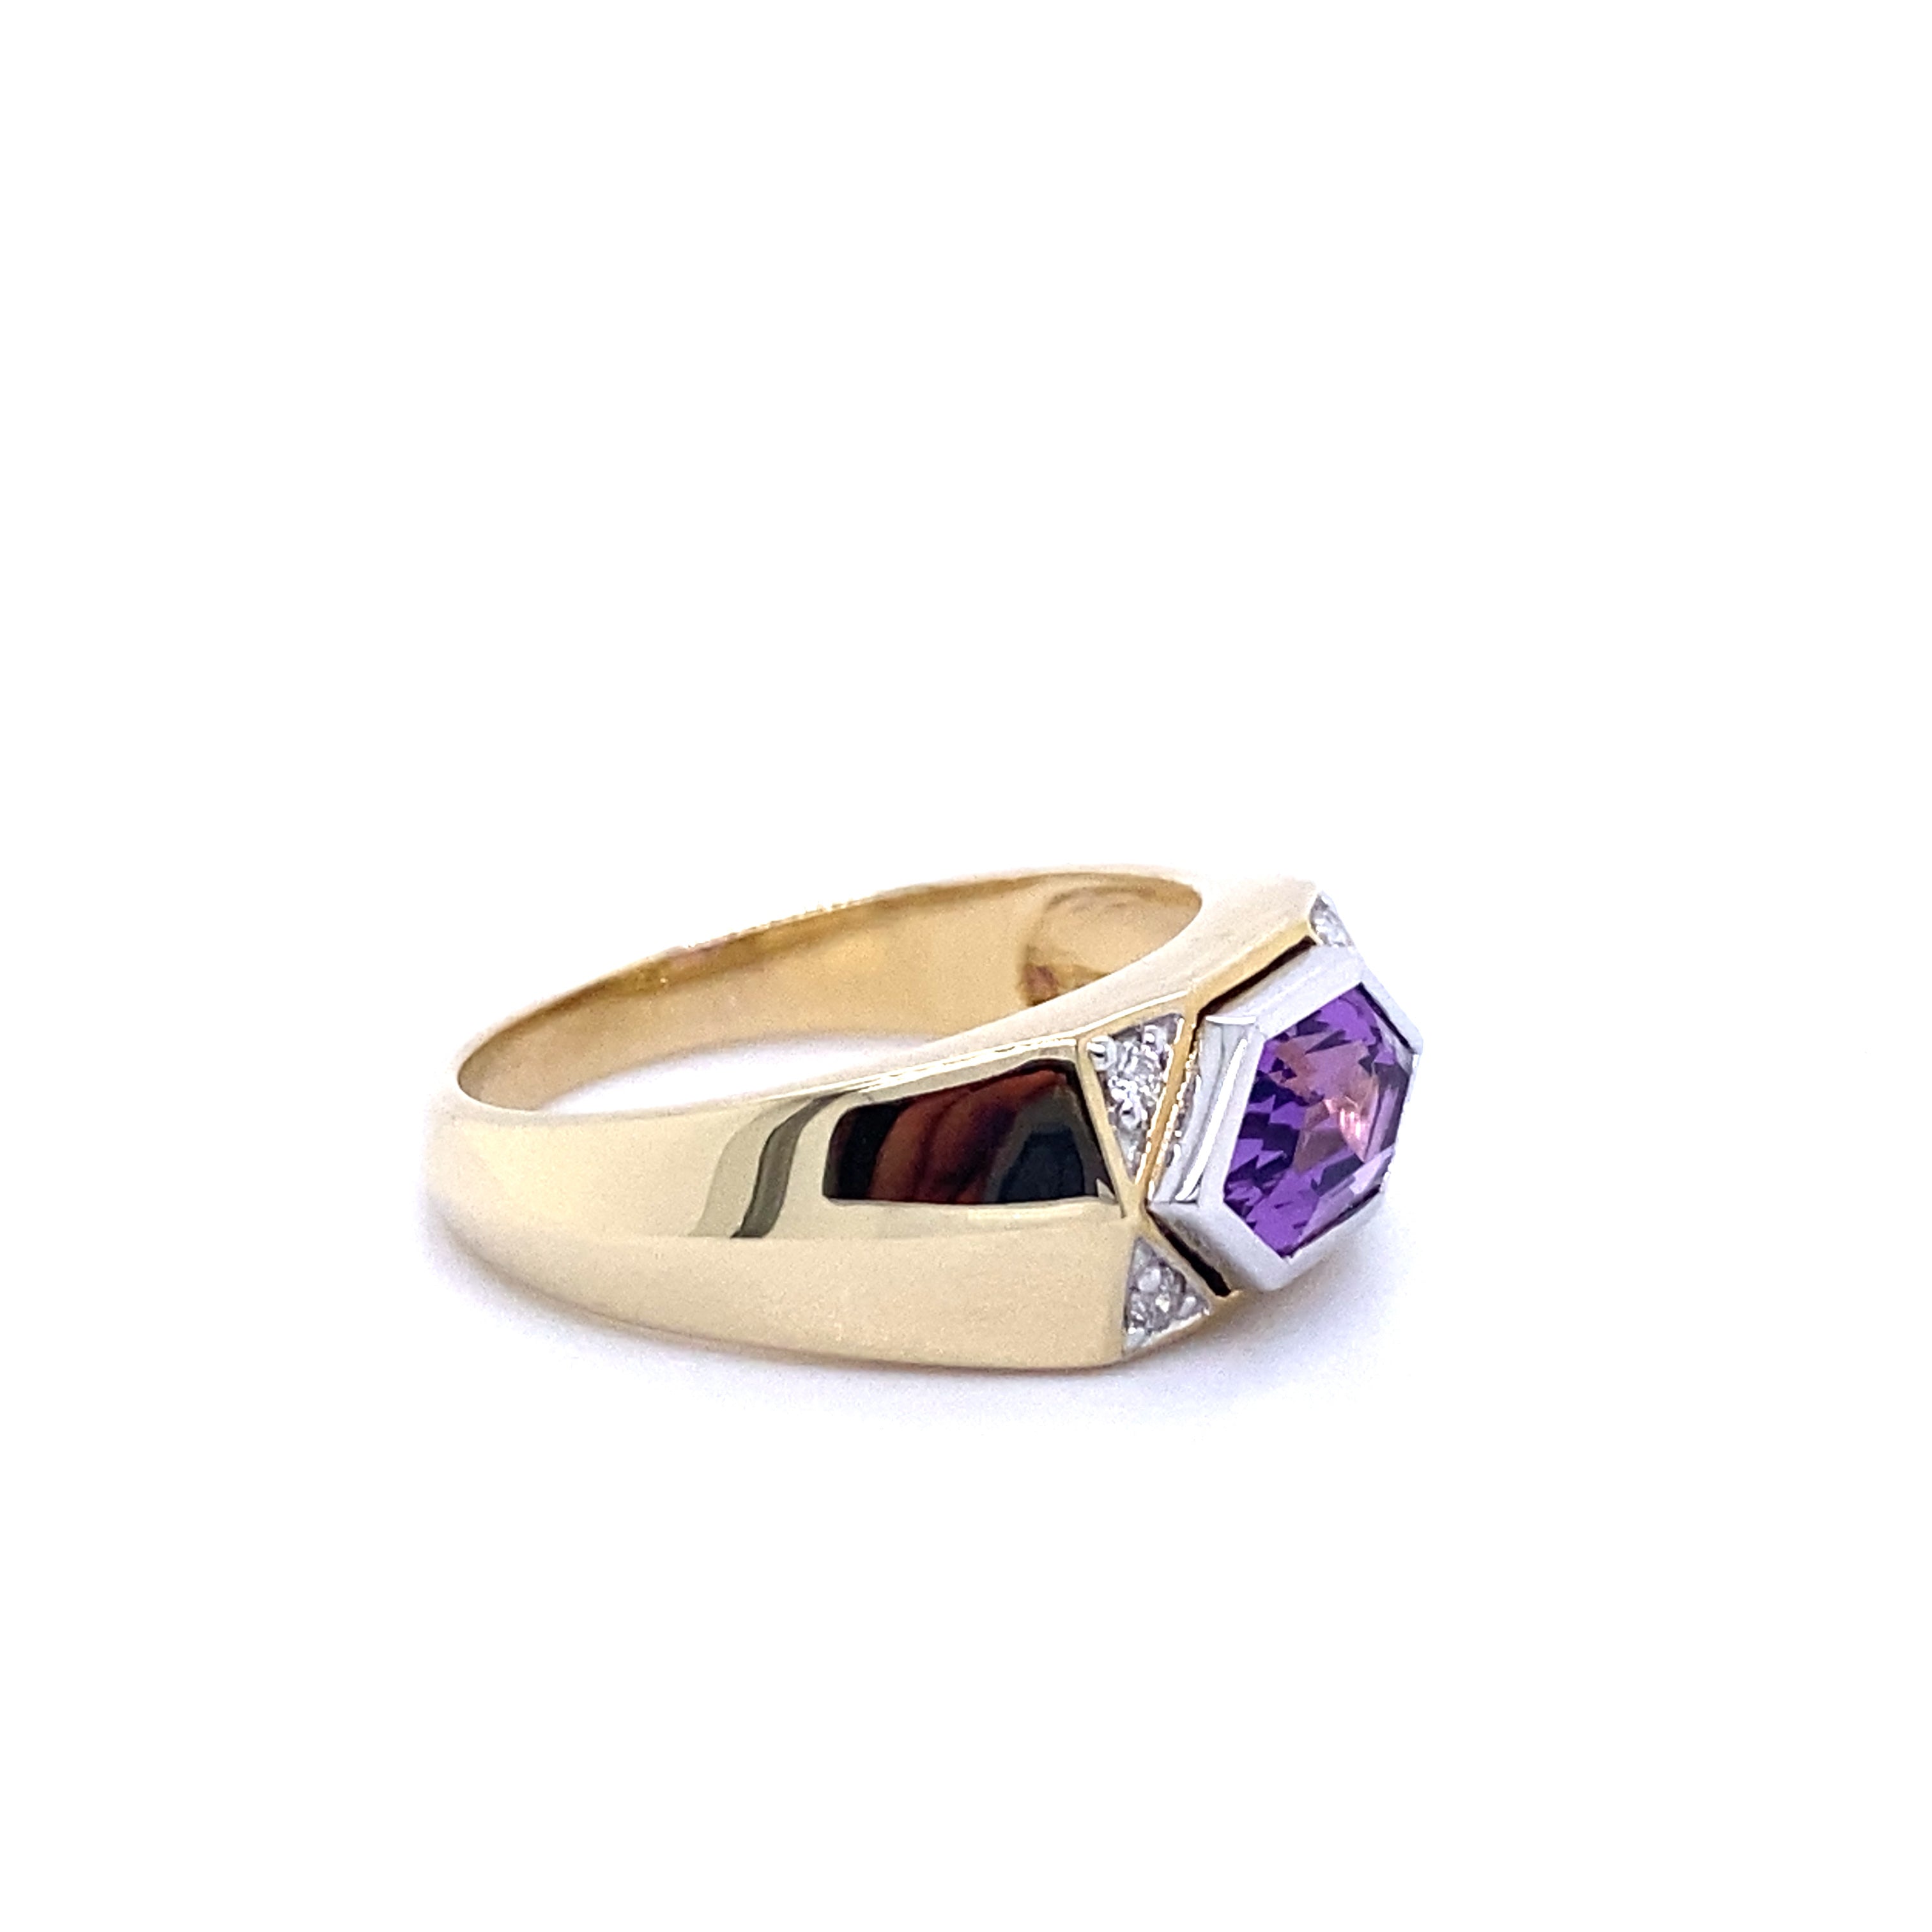 9ct yellow gold amethyst and diamond ring.